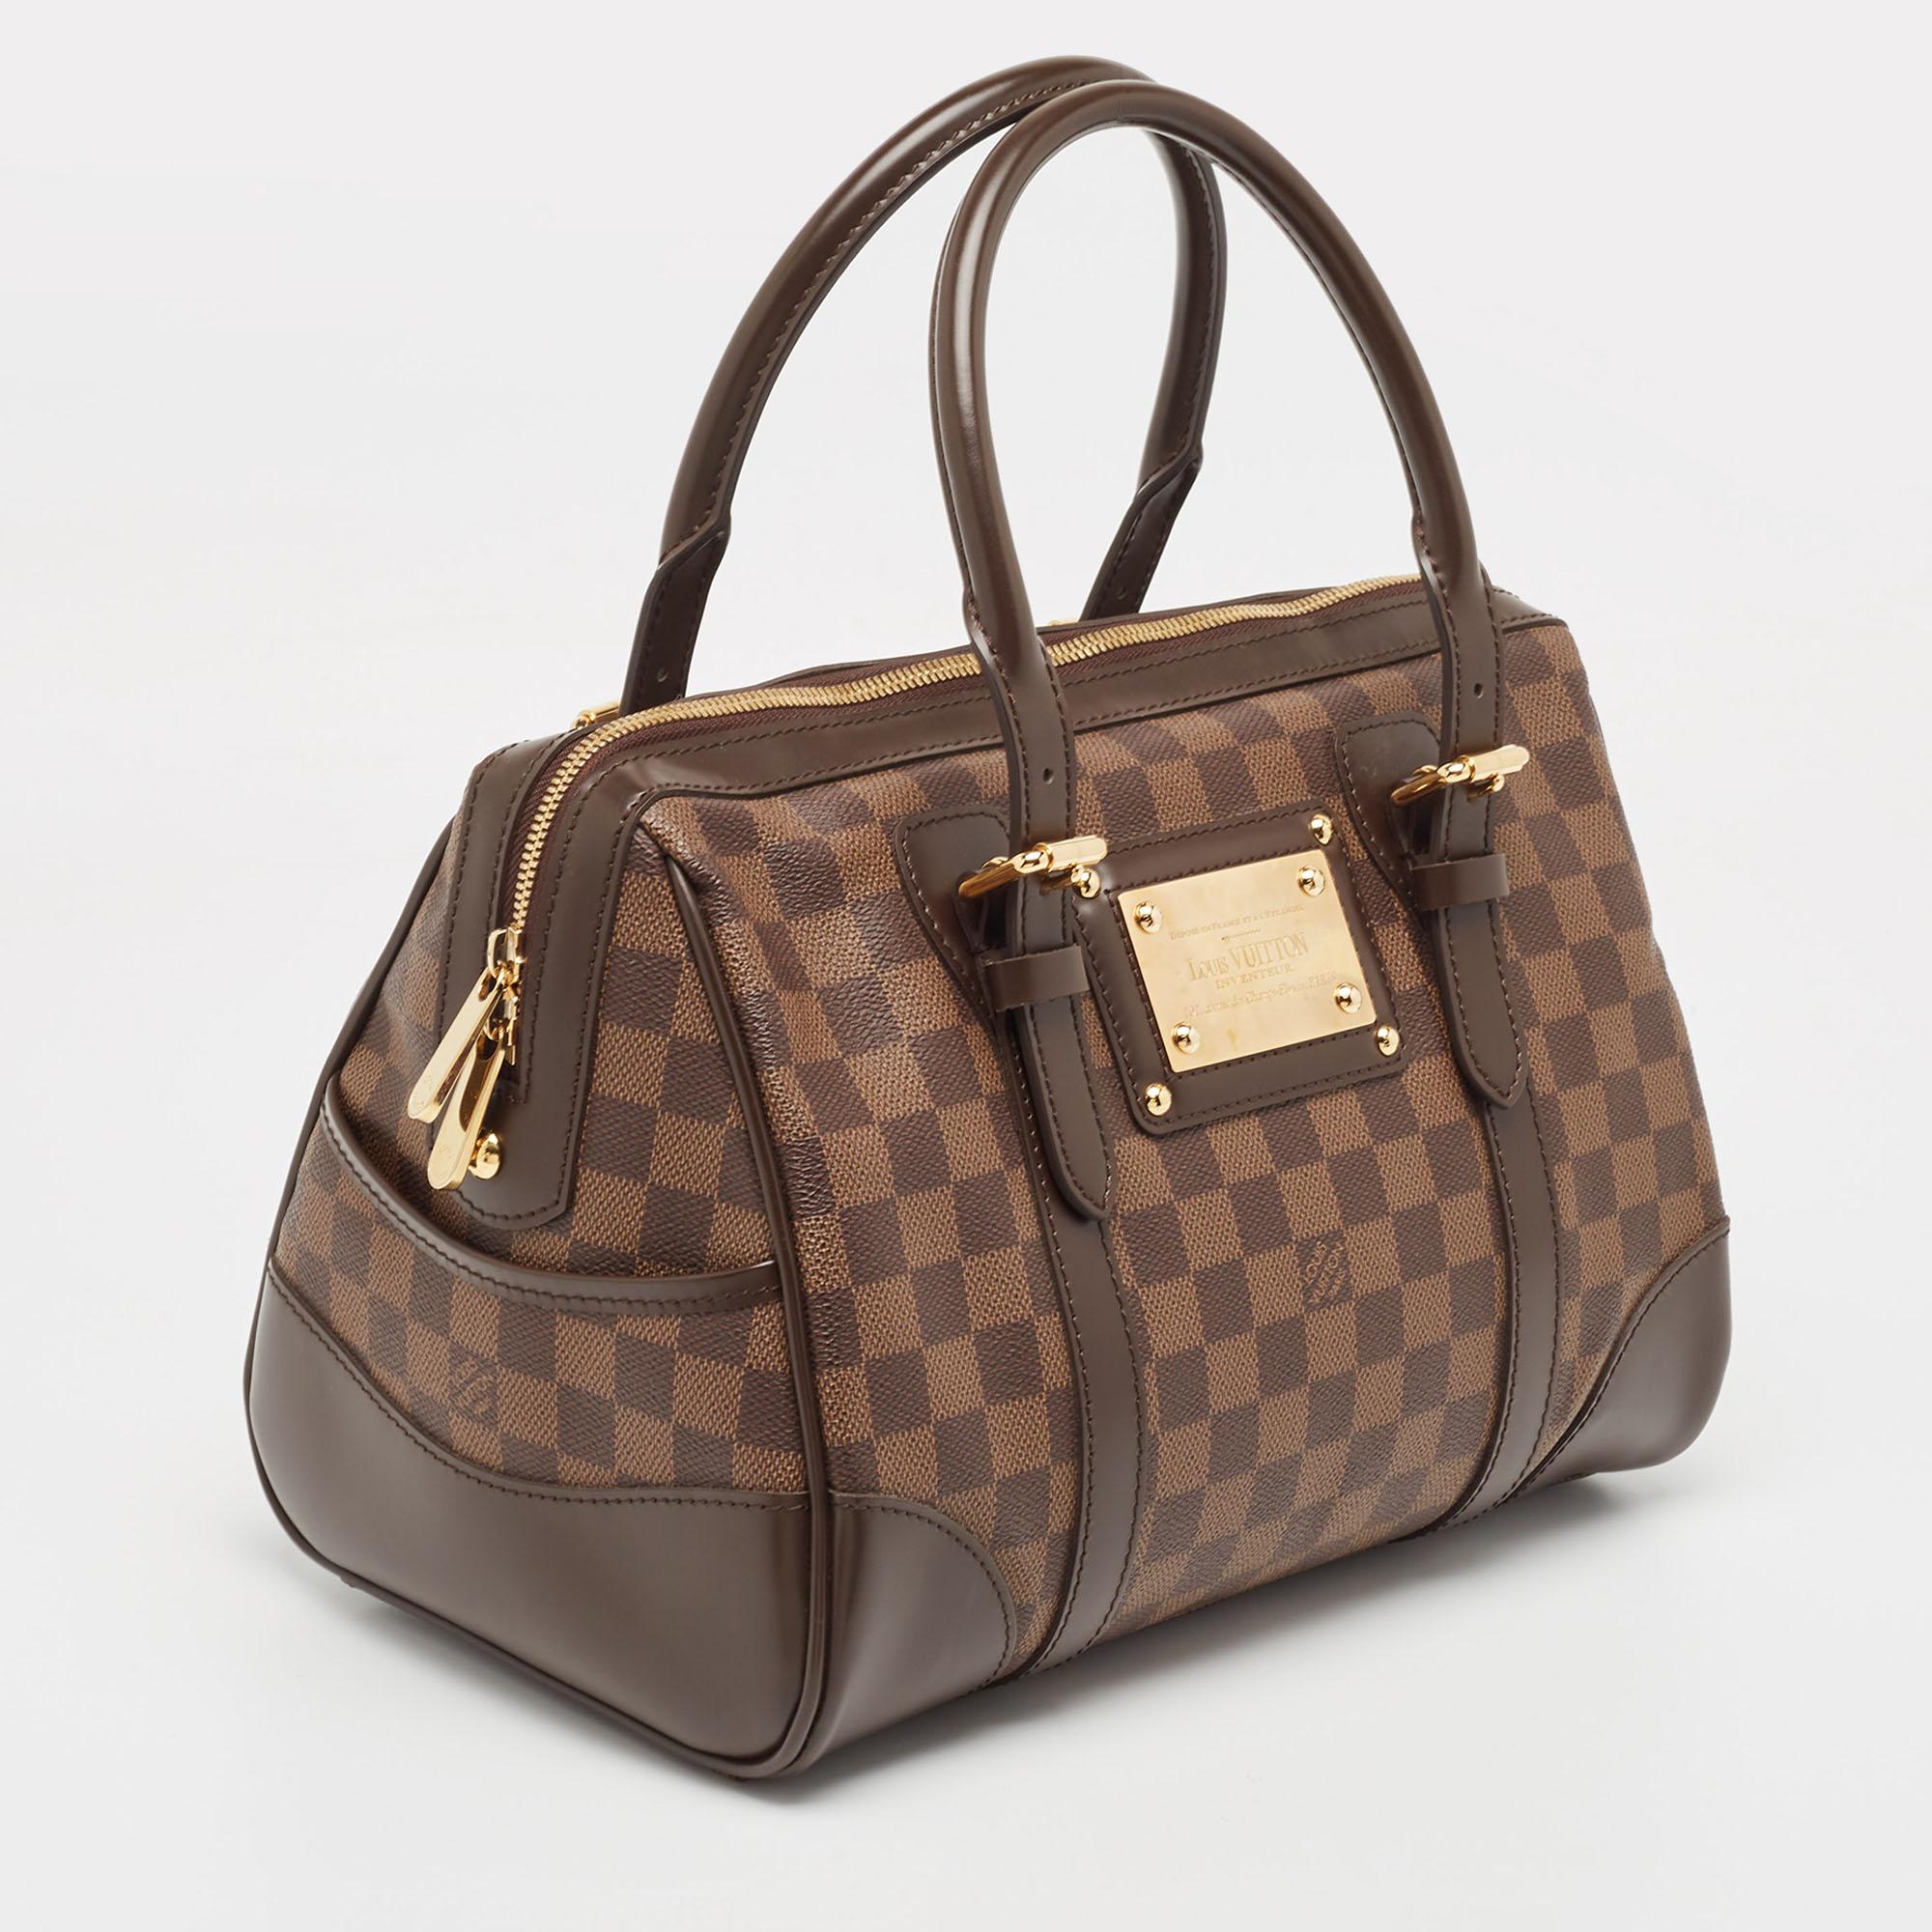 Combining Louis Vuitton’s rich heritage with its exquisite craftsmanship, this Berkeley Bag is the one that one cannot afford to miss. Softly structured from signature Damier Ebene Canvas, this fabulous style is finished with tonal brown leather